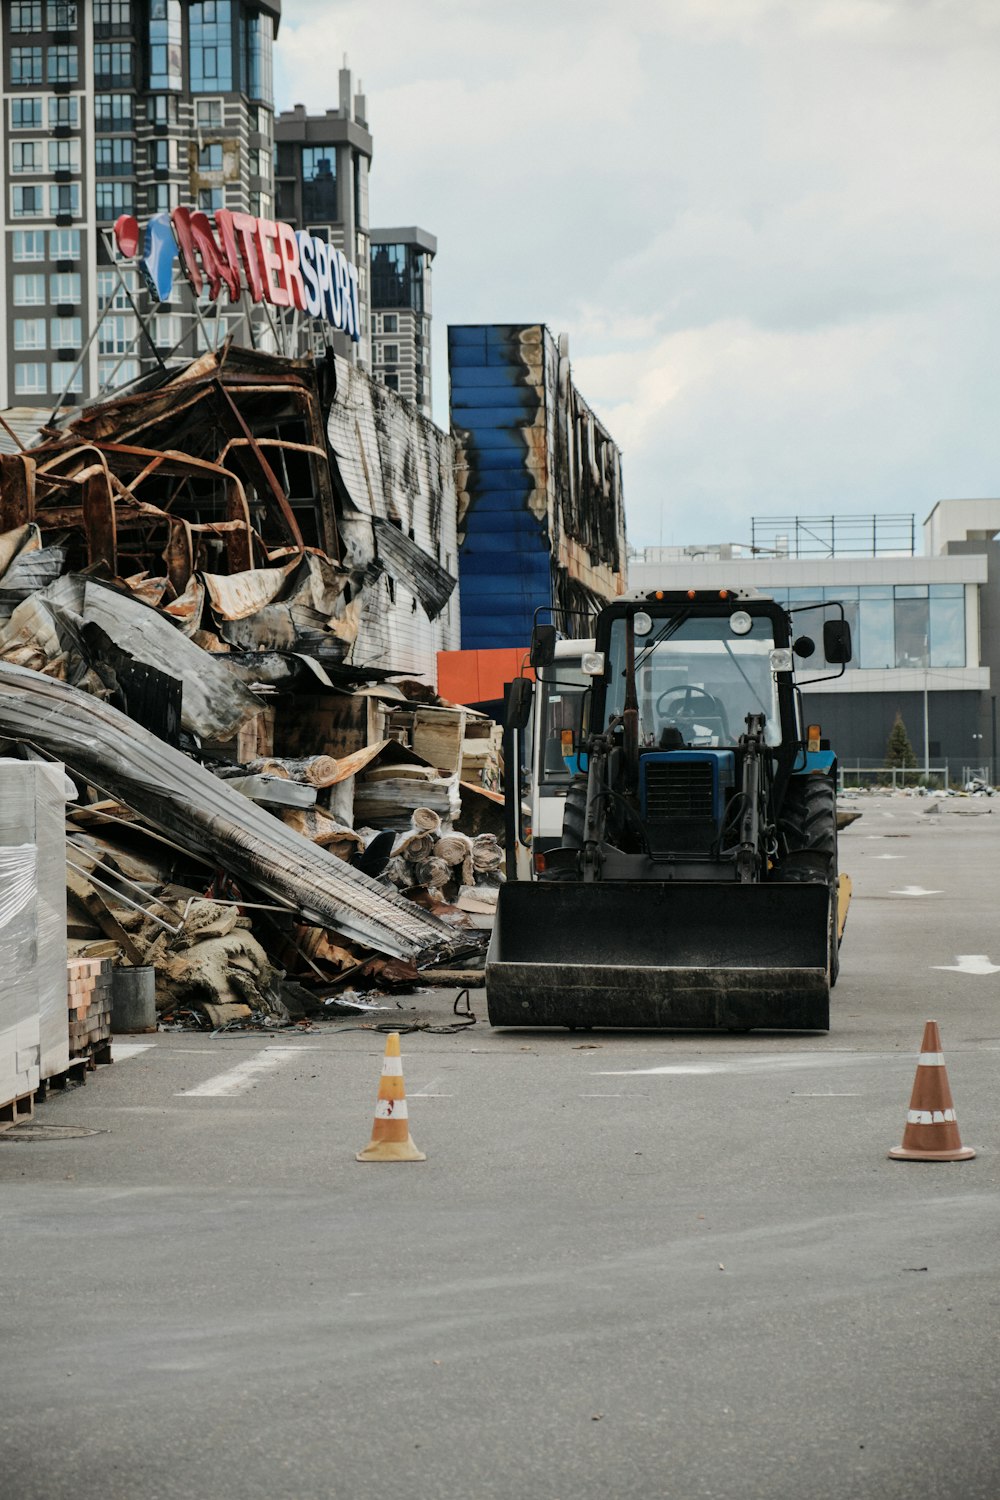 a bulldozer is parked in front of a pile of rubble